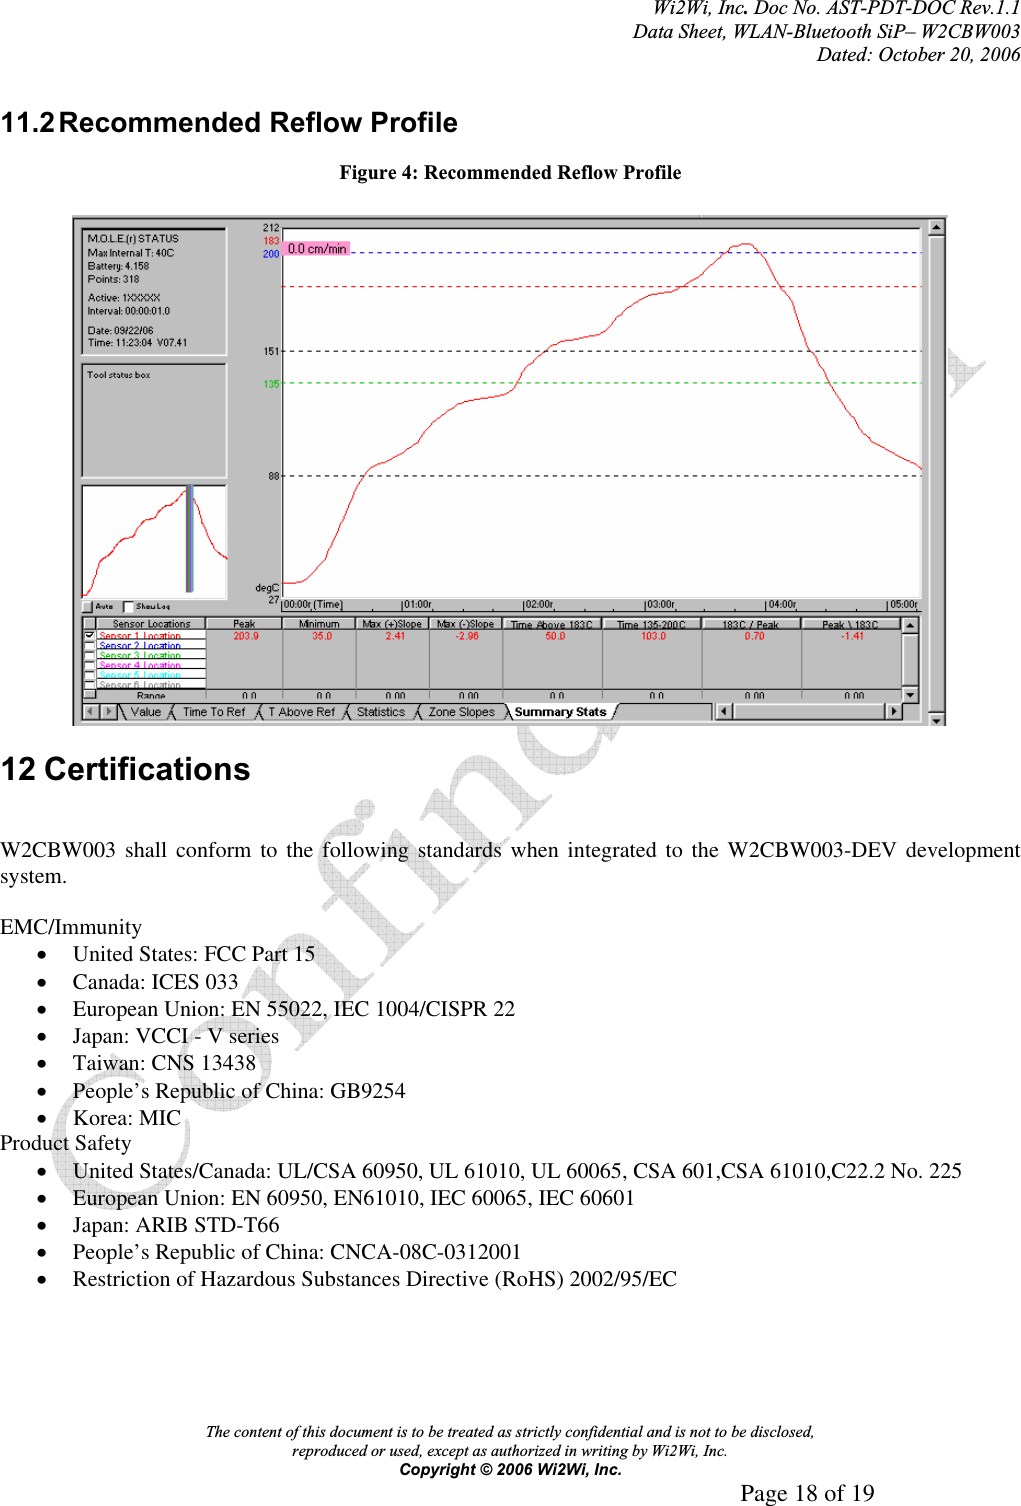 Wi2Wi, Inc.Doc No. AST-PDT-DOC Rev.1.1  Data Sheet, WLAN-Bluetooth SiP– W2CBW003 Dated: October 20, 2006 The content of this document is to be treated as strictly confidential and is not to be disclosed,  reproduced or used, except as authorized in writing by Wi2Wi, Inc.  Copyright © 2006 Wi2Wi, Inc.     Page 18 of 19   11.2 Recommended Reflow Profile Figure 4: Recommended Reflow Profile 12 Certifications W2CBW003 shall conform to the following standards when integrated to the W2CBW003-DEV development system.  EMC/Immunity xUnited States: FCC Part 15 xCanada: ICES 033 xEuropean Union: EN 55022, IEC 1004/CISPR 22 xJapan: VCCI - V series xTaiwan: CNS 13438 xPeople’s Republic of China: GB9254 xKorea: MIC Product Safety xUnited States/Canada: UL/CSA 60950, UL 61010, UL 60065, CSA 601,CSA 61010,C22.2 No. 225 xEuropean Union: EN 60950, EN61010, IEC 60065, IEC 60601 xJapan: ARIB STD-T66 xPeople’s Republic of China: CNCA-08C-0312001 xRestriction of Hazardous Substances Directive (RoHS) 2002/95/EC 